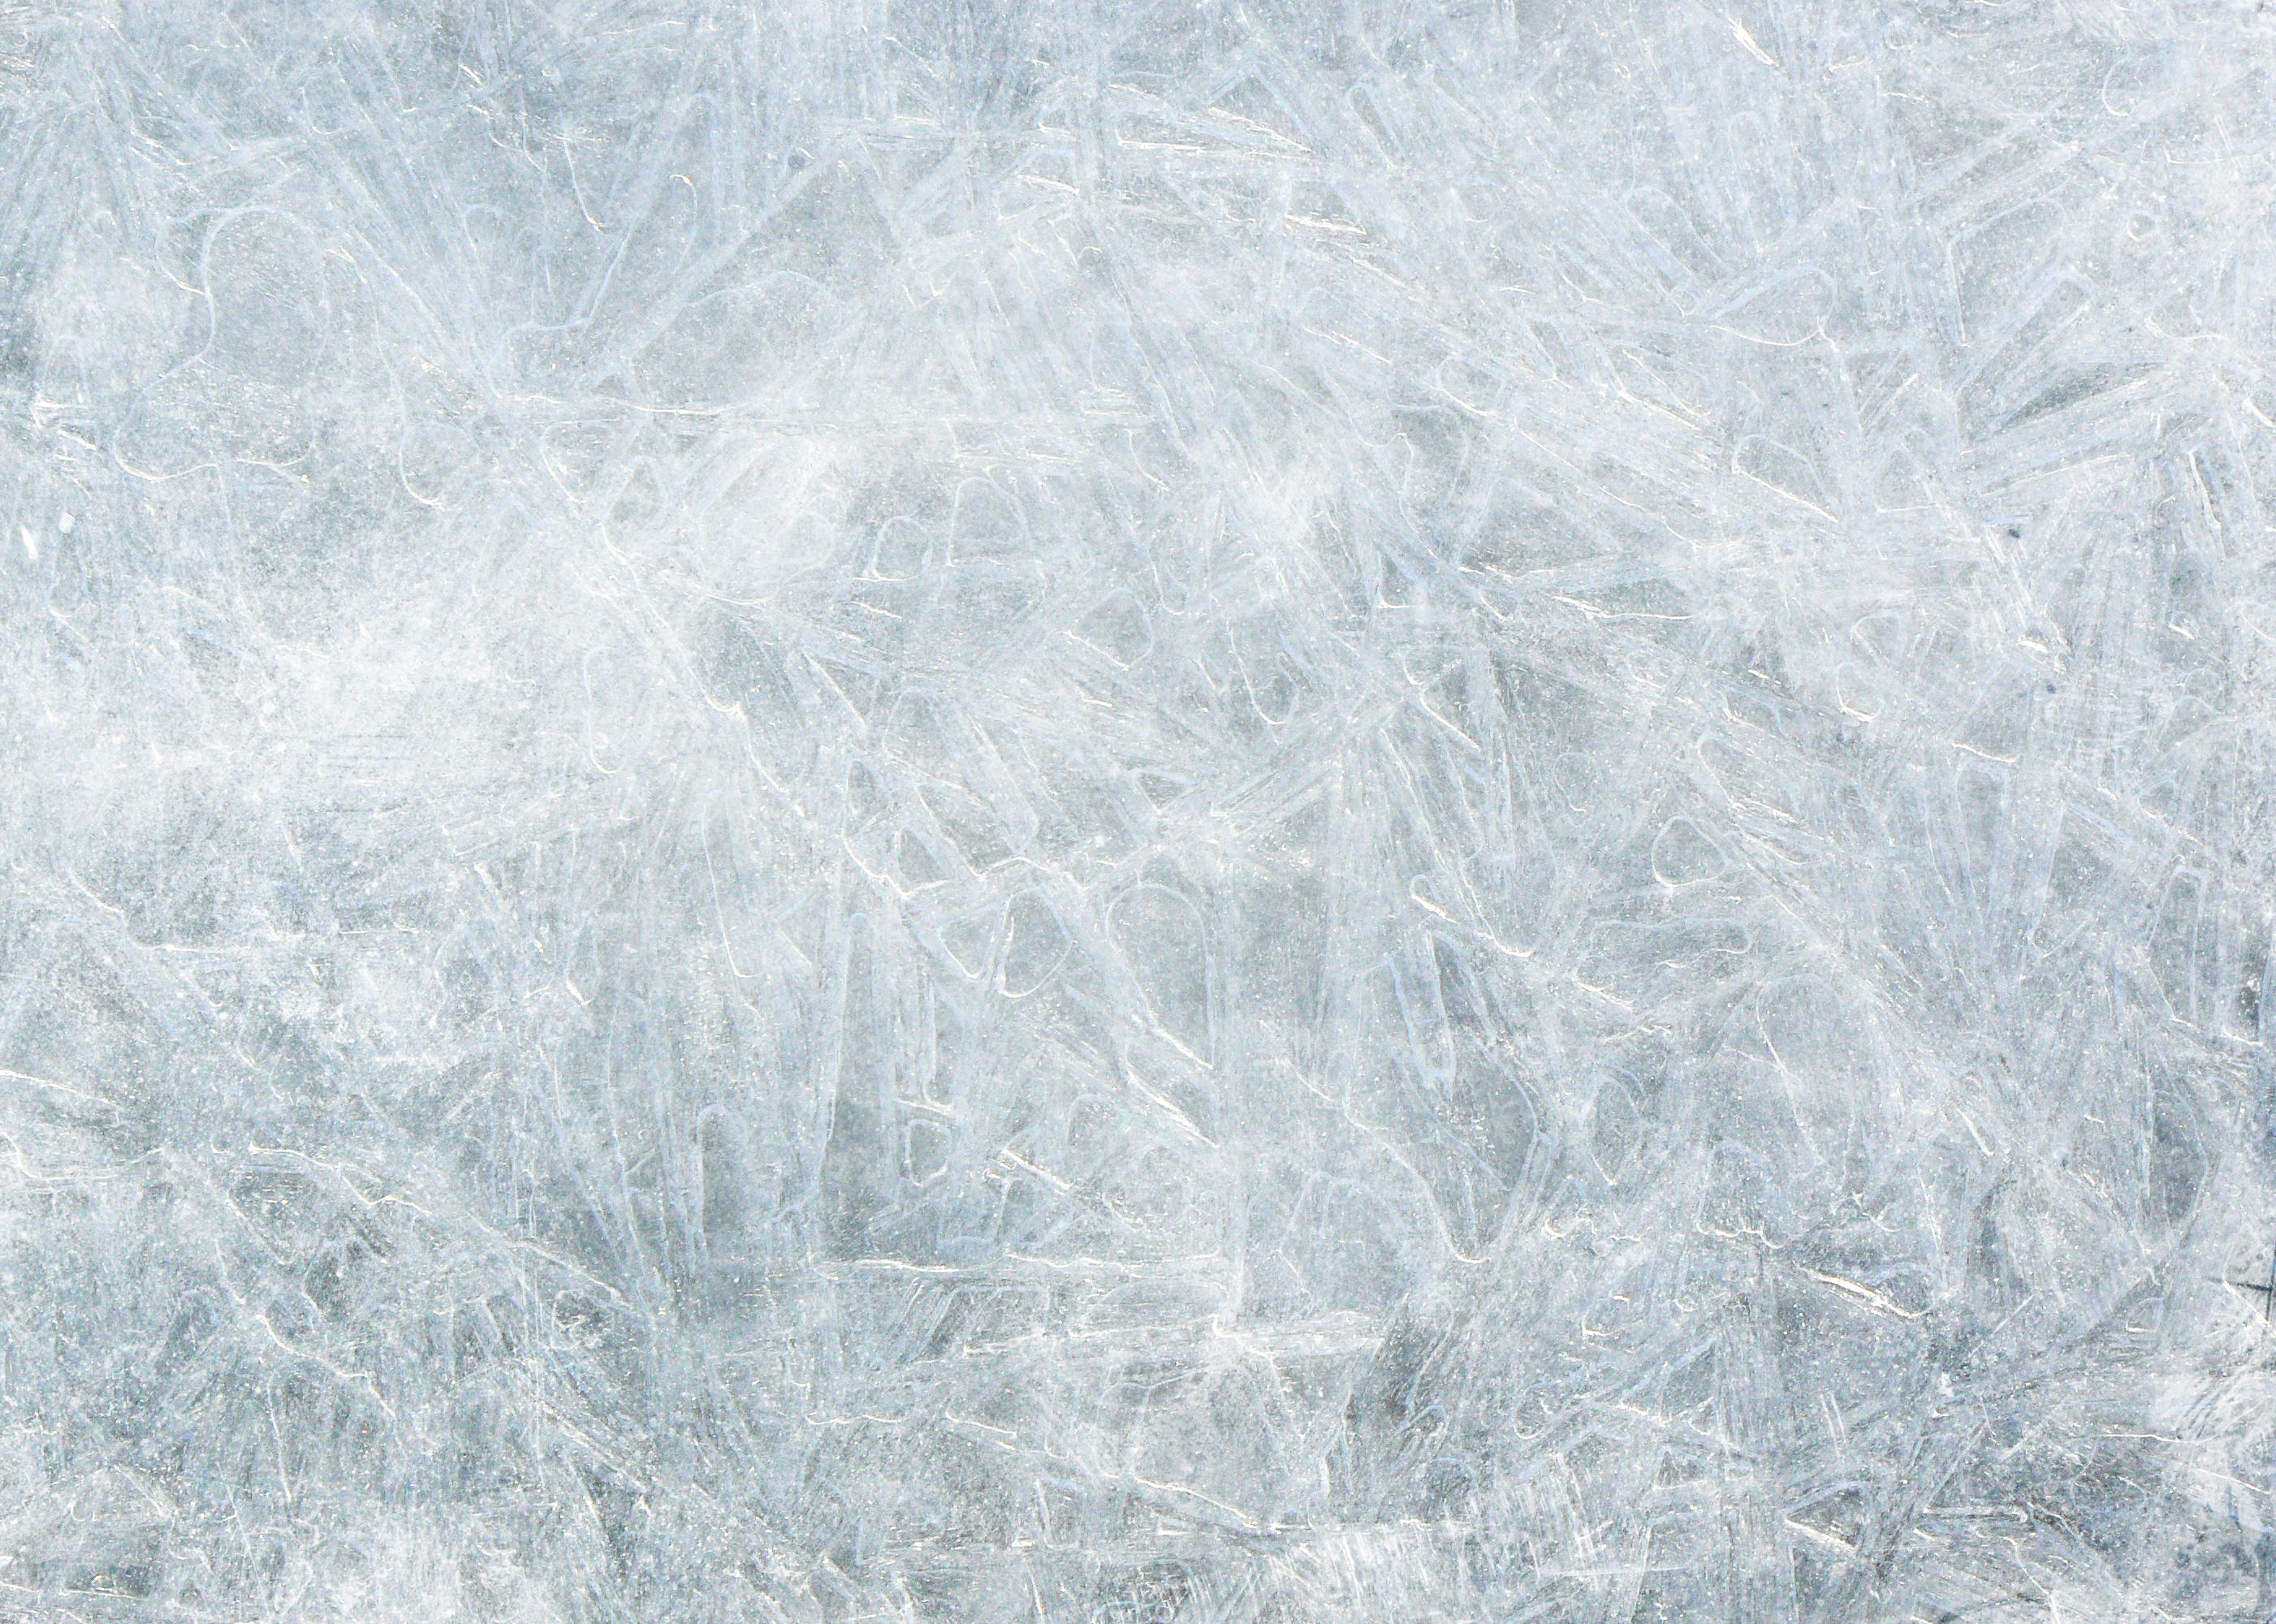 Ice Texture for free download